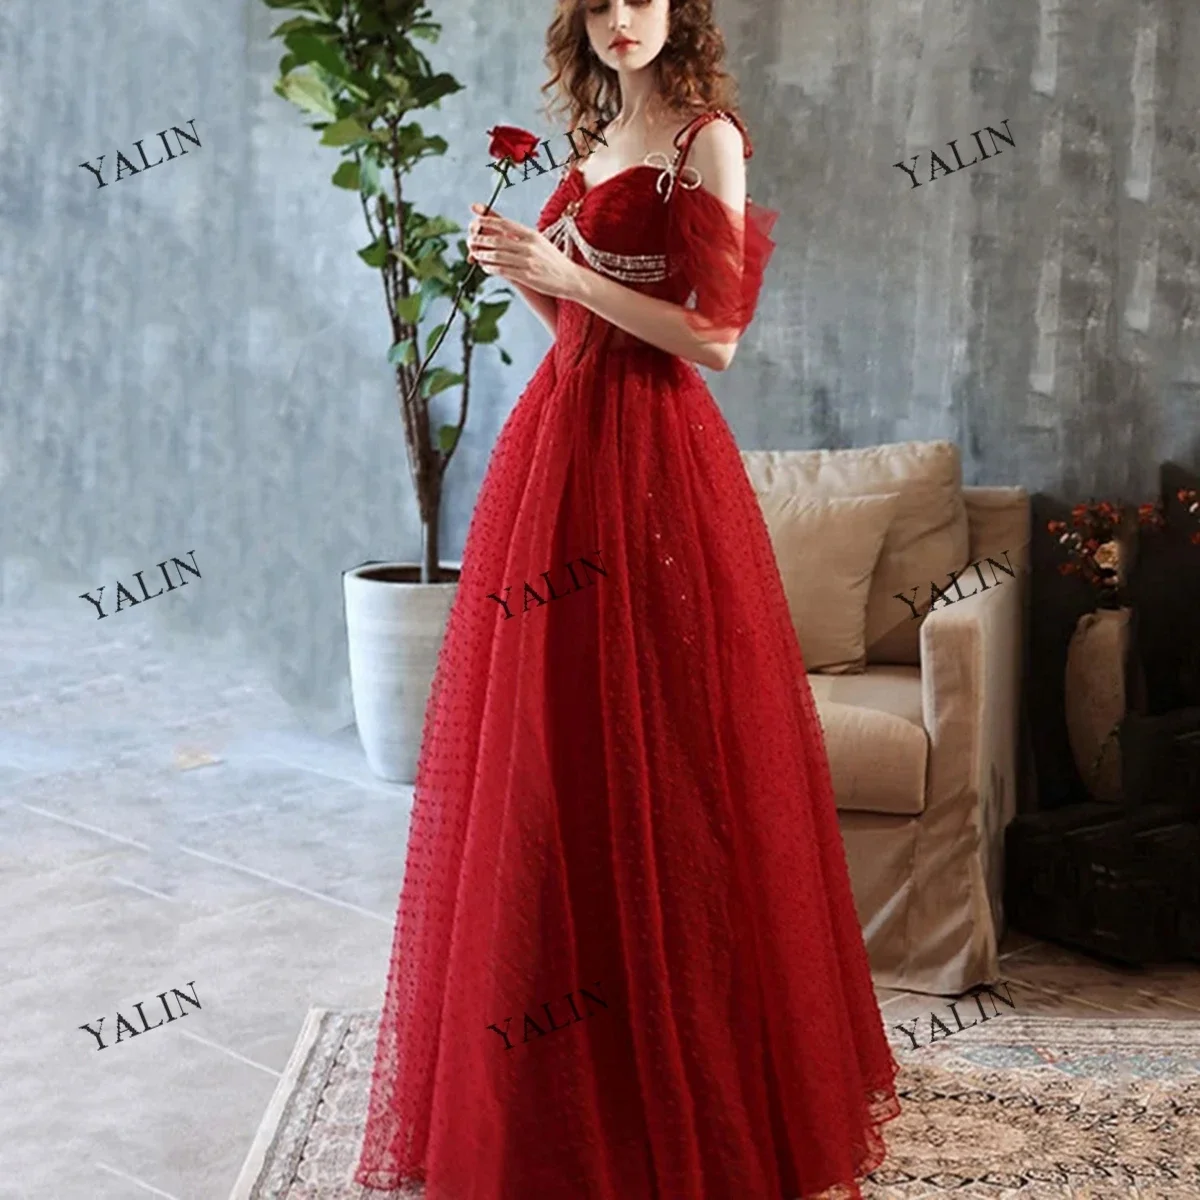 

YALIN Charming Illusion Off Shoulder Evening Gown Floor Length Princess Prom Dresses Pearsl Beading A-Line Event Party Dress